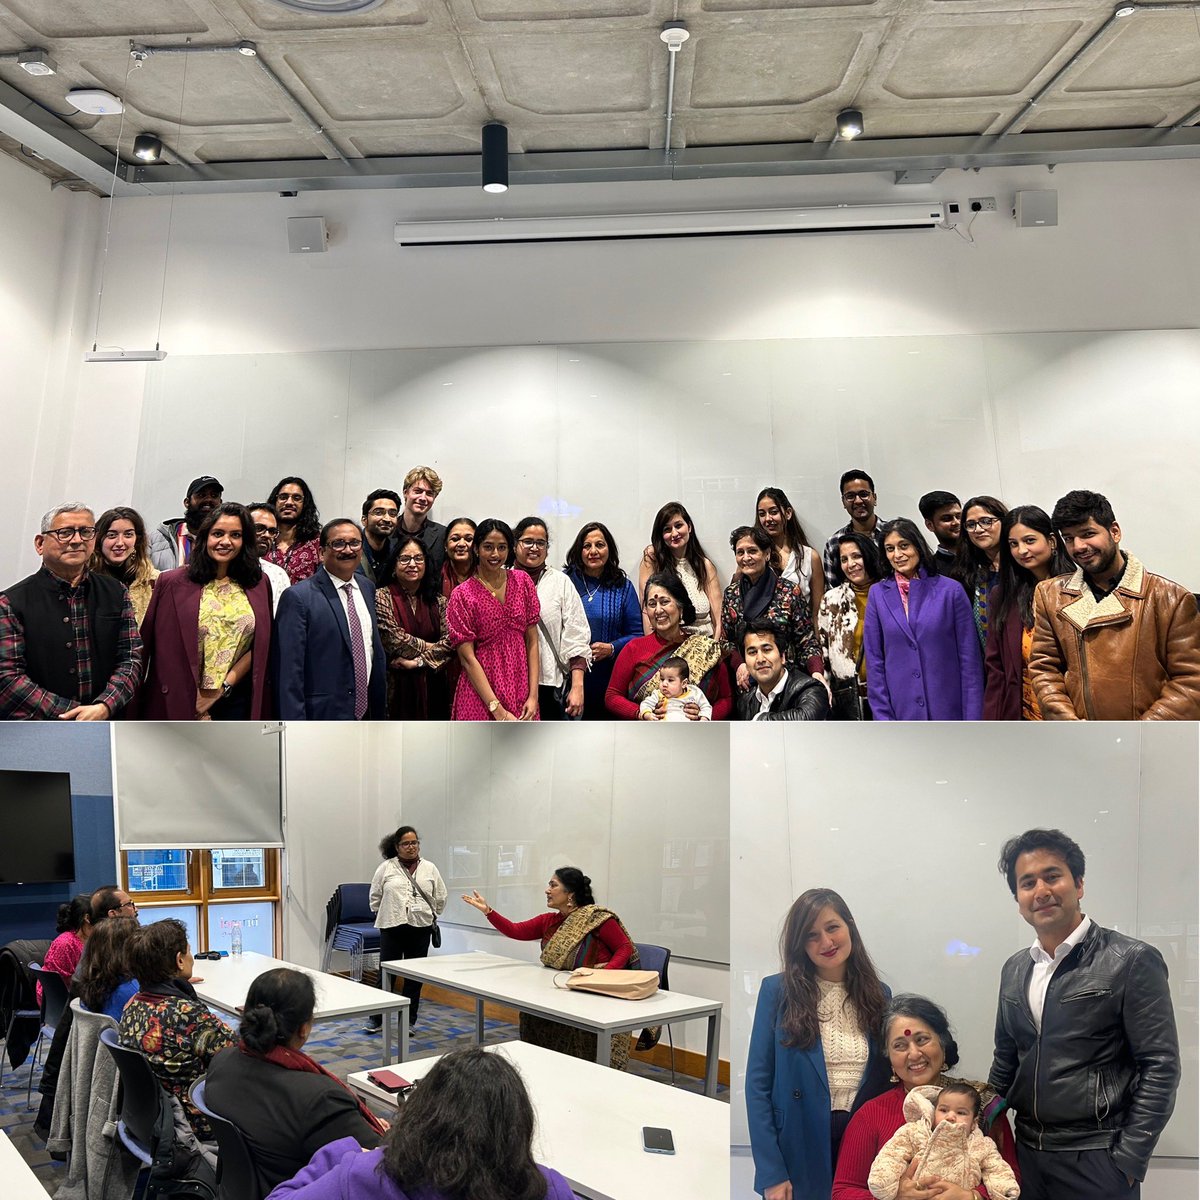 Sama and her grandma Dr. Anamika Anamika gifted us all a beautiful evening of poetry at @SOAS last evening. Thanks to all who joined and made this evening special. P.S. It was Sama’s first lecture and she beamed with pride as her grandma mesmerized the room. P.P.S. She is 90…